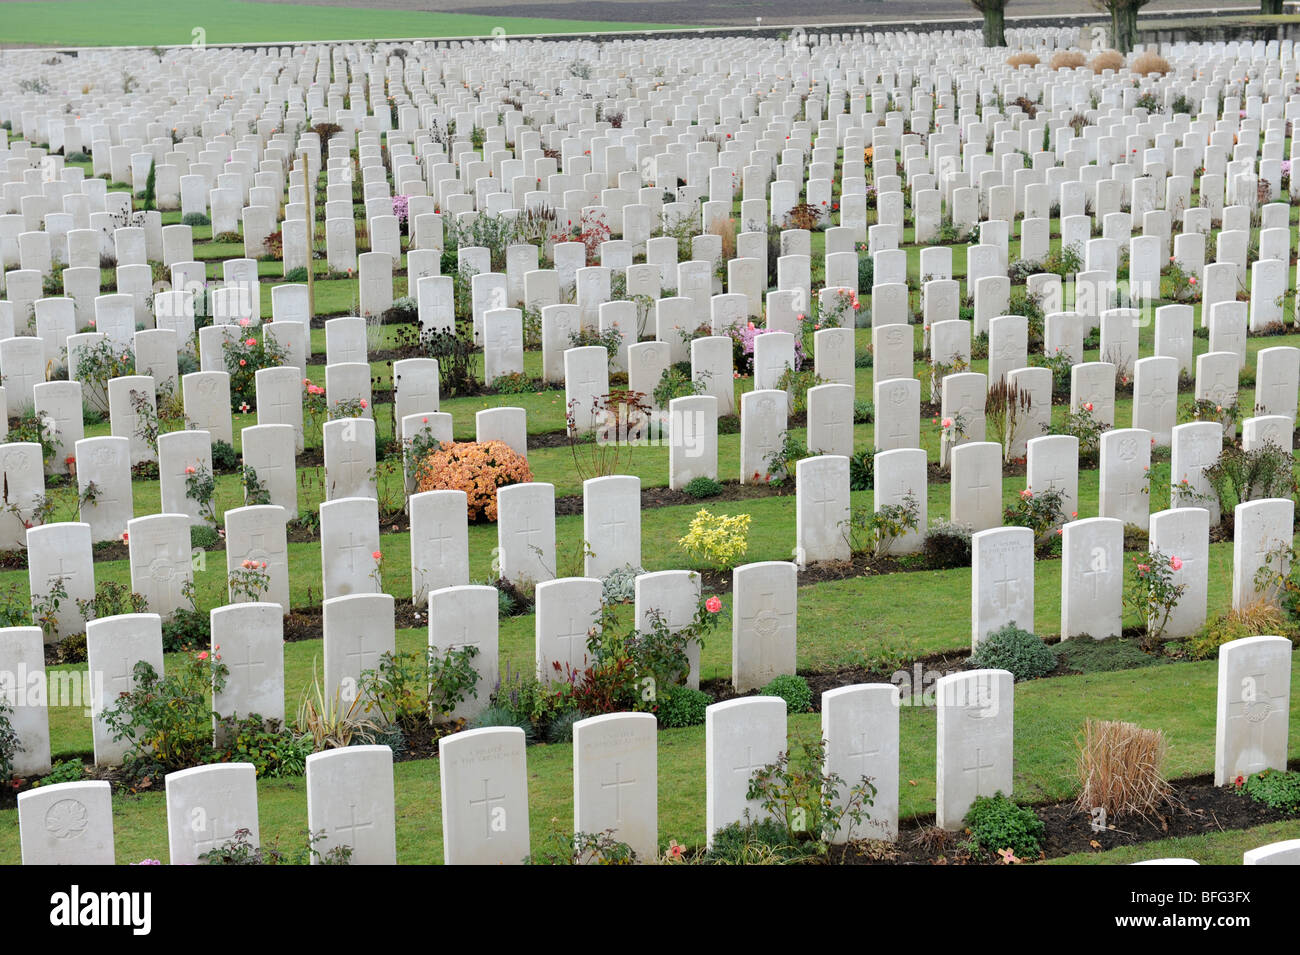 Graves of First World War soldiers at Tyne Cot Cemetery Passchendale Ypres Belgium Stock Photo